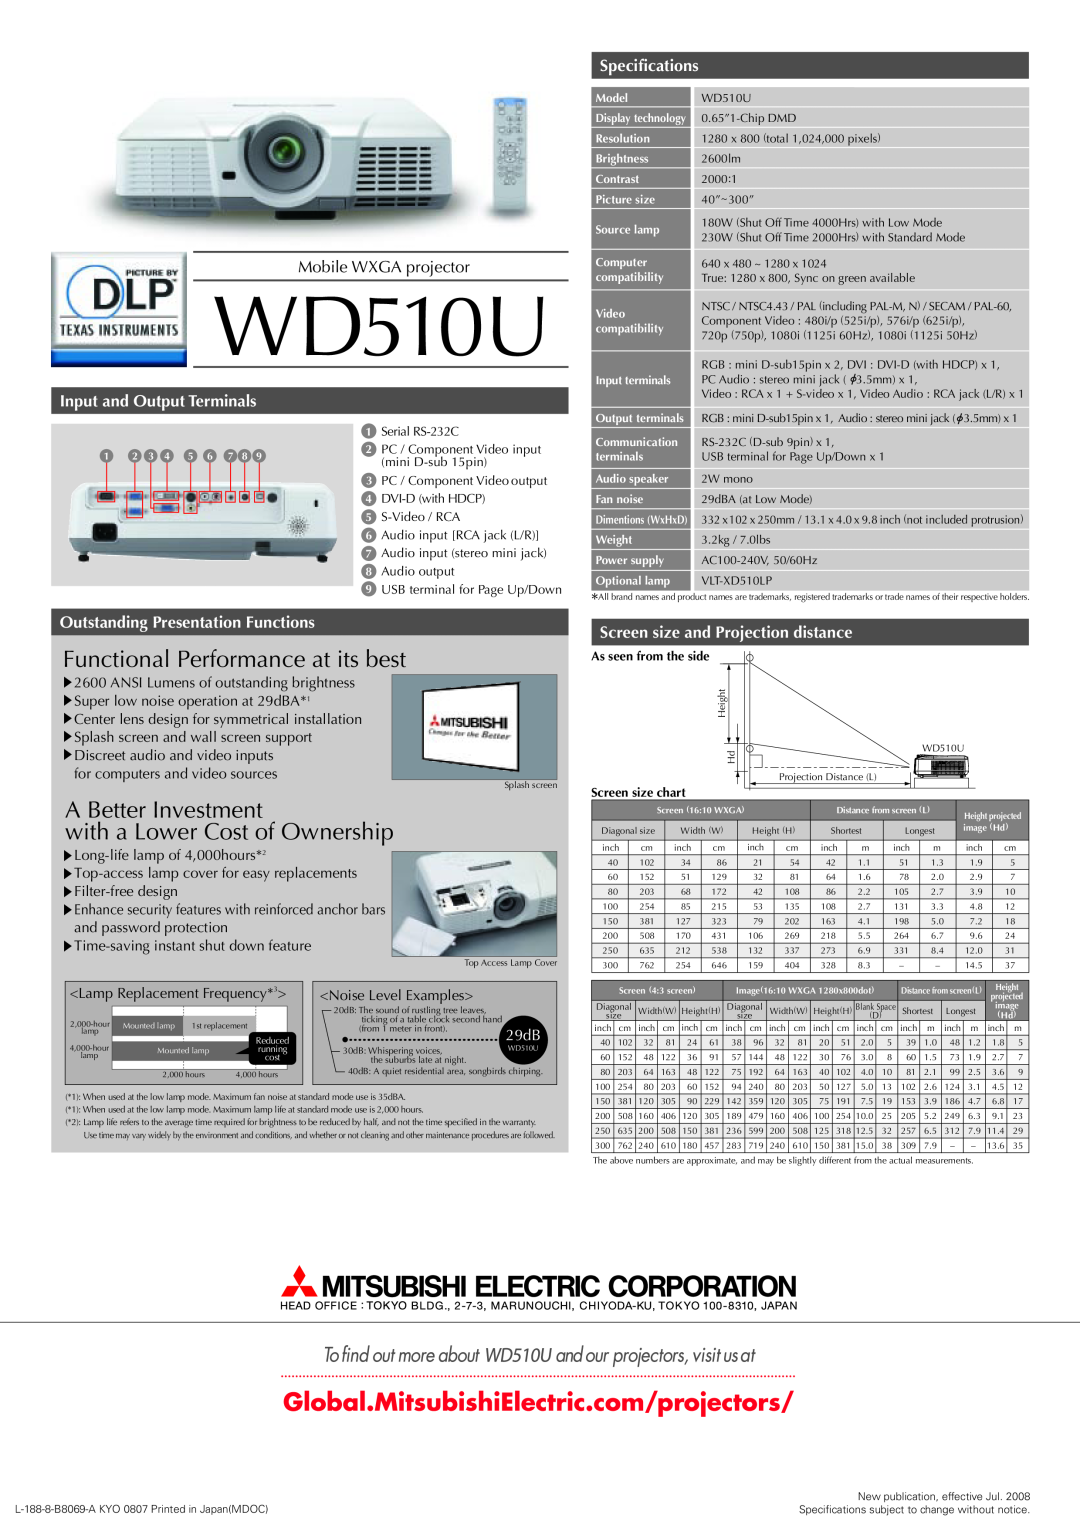 Mitsubishi Electronics WD510U Functional Performance at its best, A Better Investment with a Lower Cost of Ownership, 29dB 